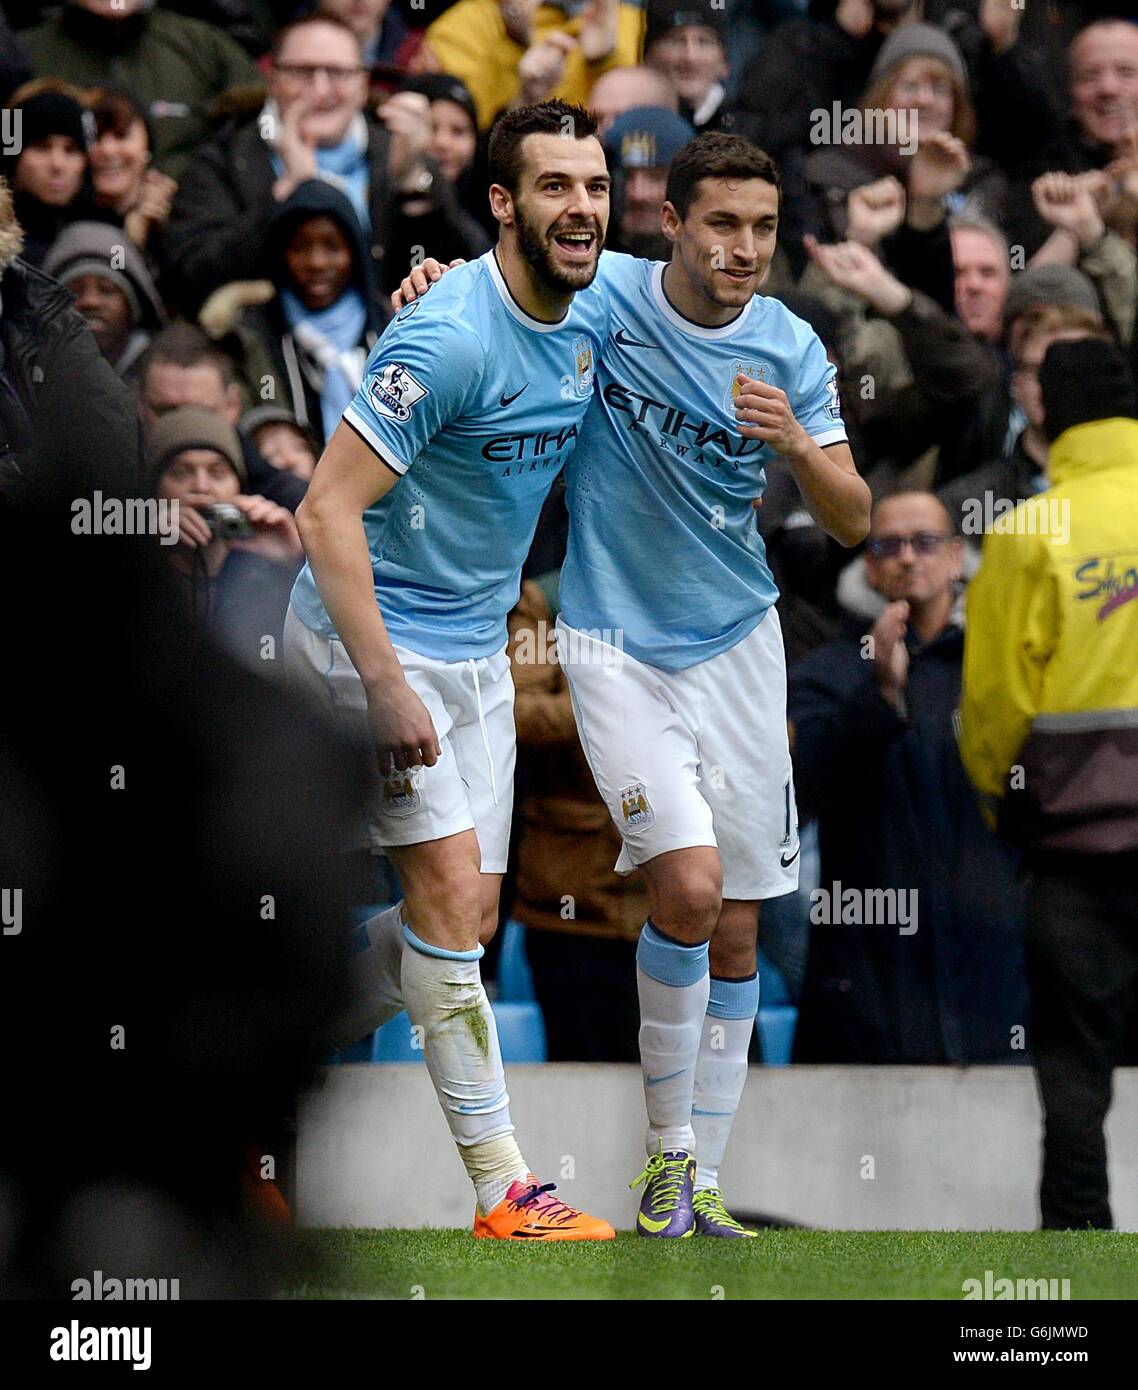 Manchester City's Alvaro Negredo (left) celebrates with team-mate Gonzalez Jesus Navas after his shot is turned in by Tottenham Hotspur's Raniere Sandro giving them their second goal of the game Stock Photo